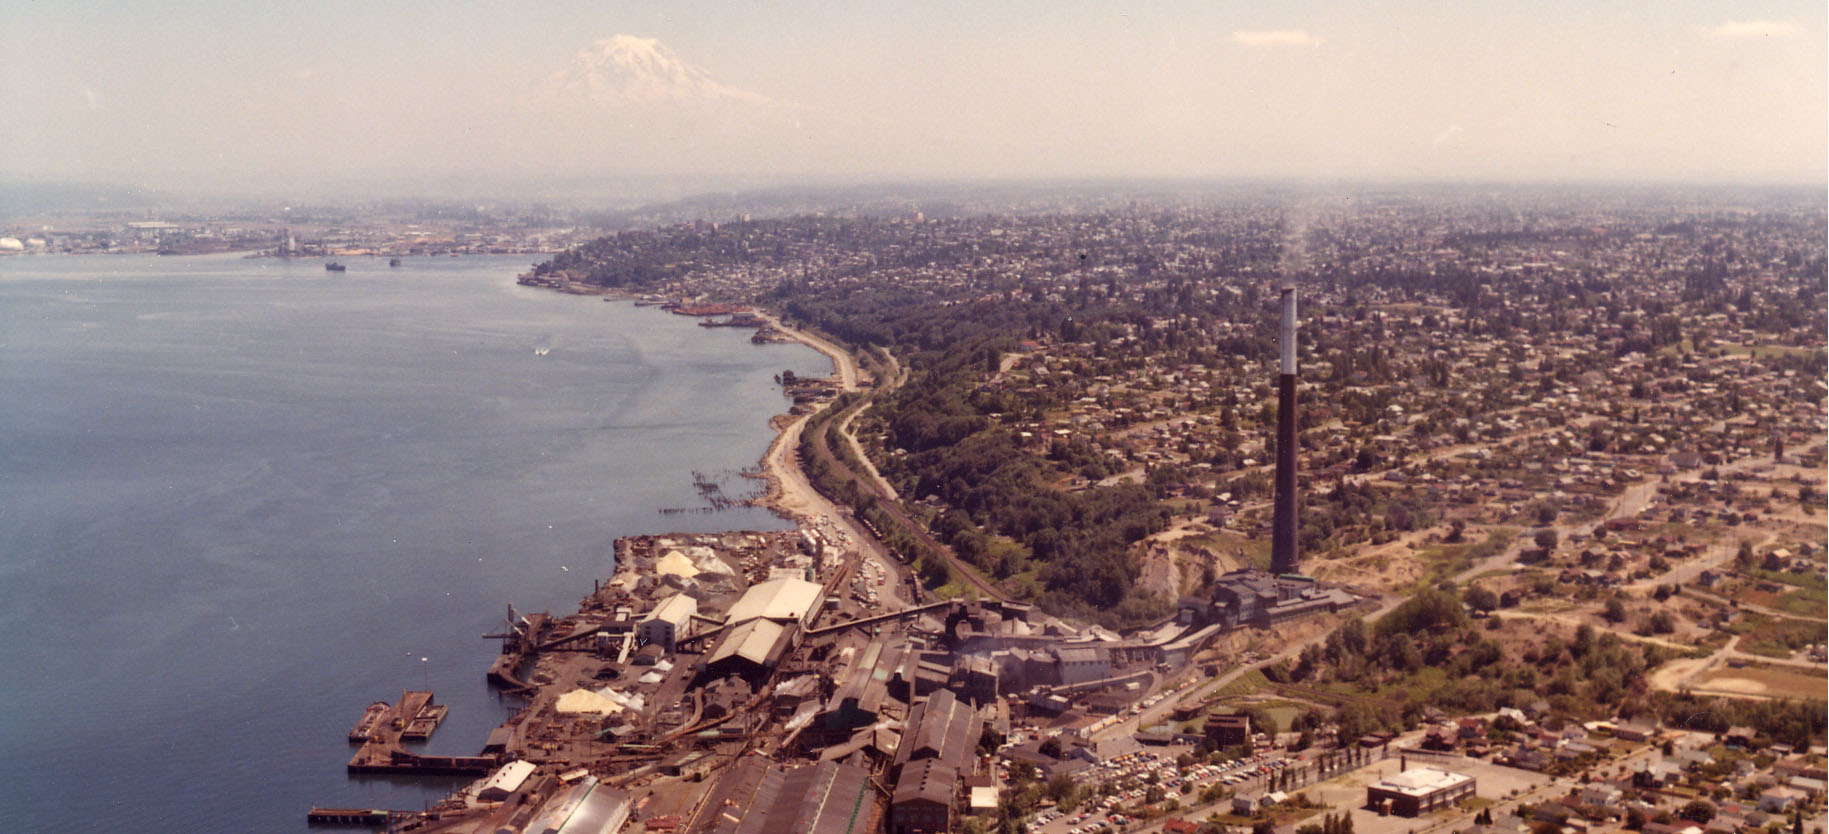 Old waterfront photo, mountain in background, tall industrial smokestack in foreground.